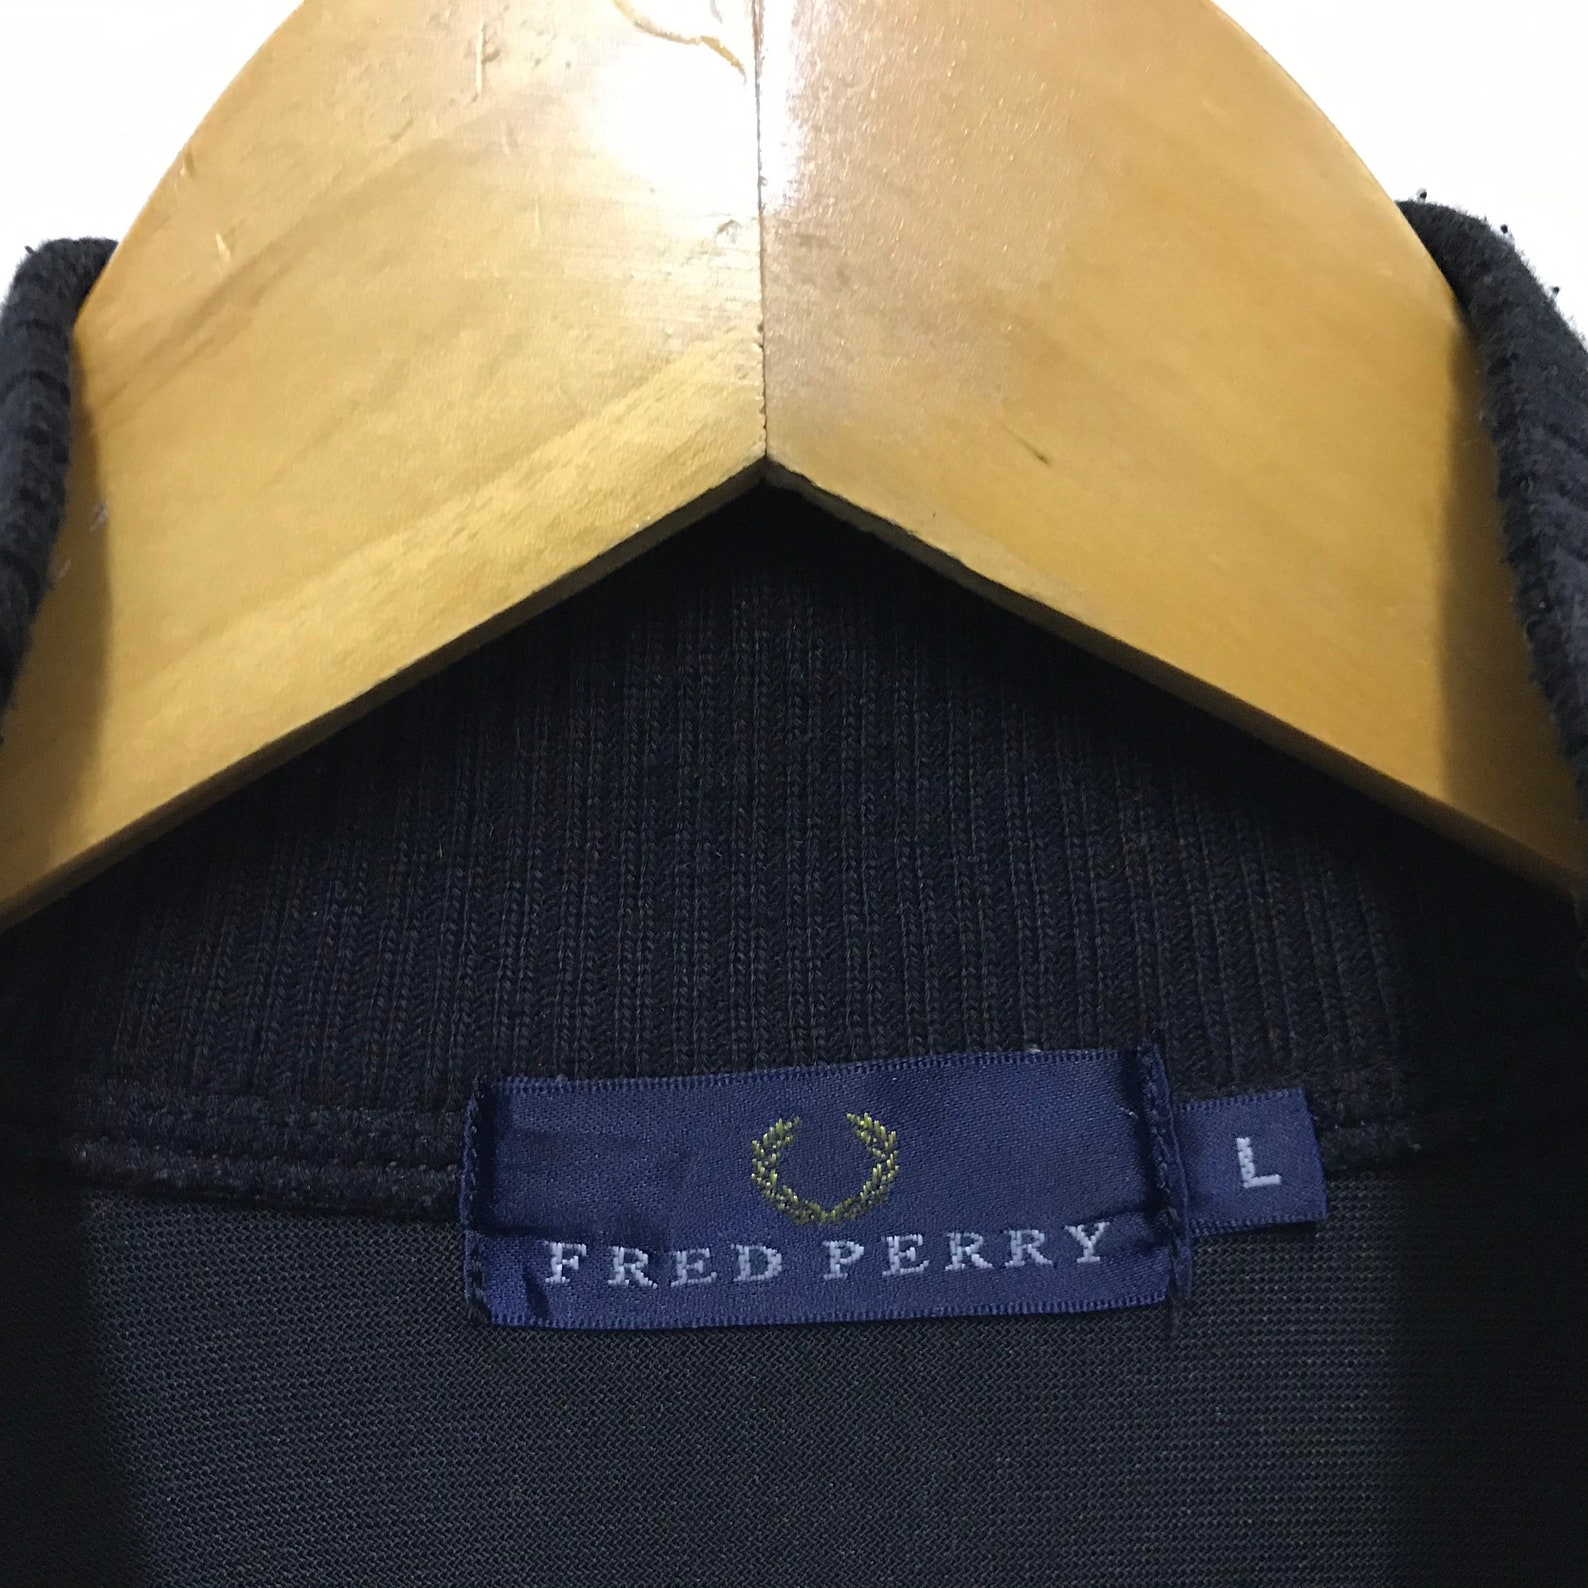 Extremely Rare Vintage Fred Perry Sweatshirt Velvet Fabric | Etsy